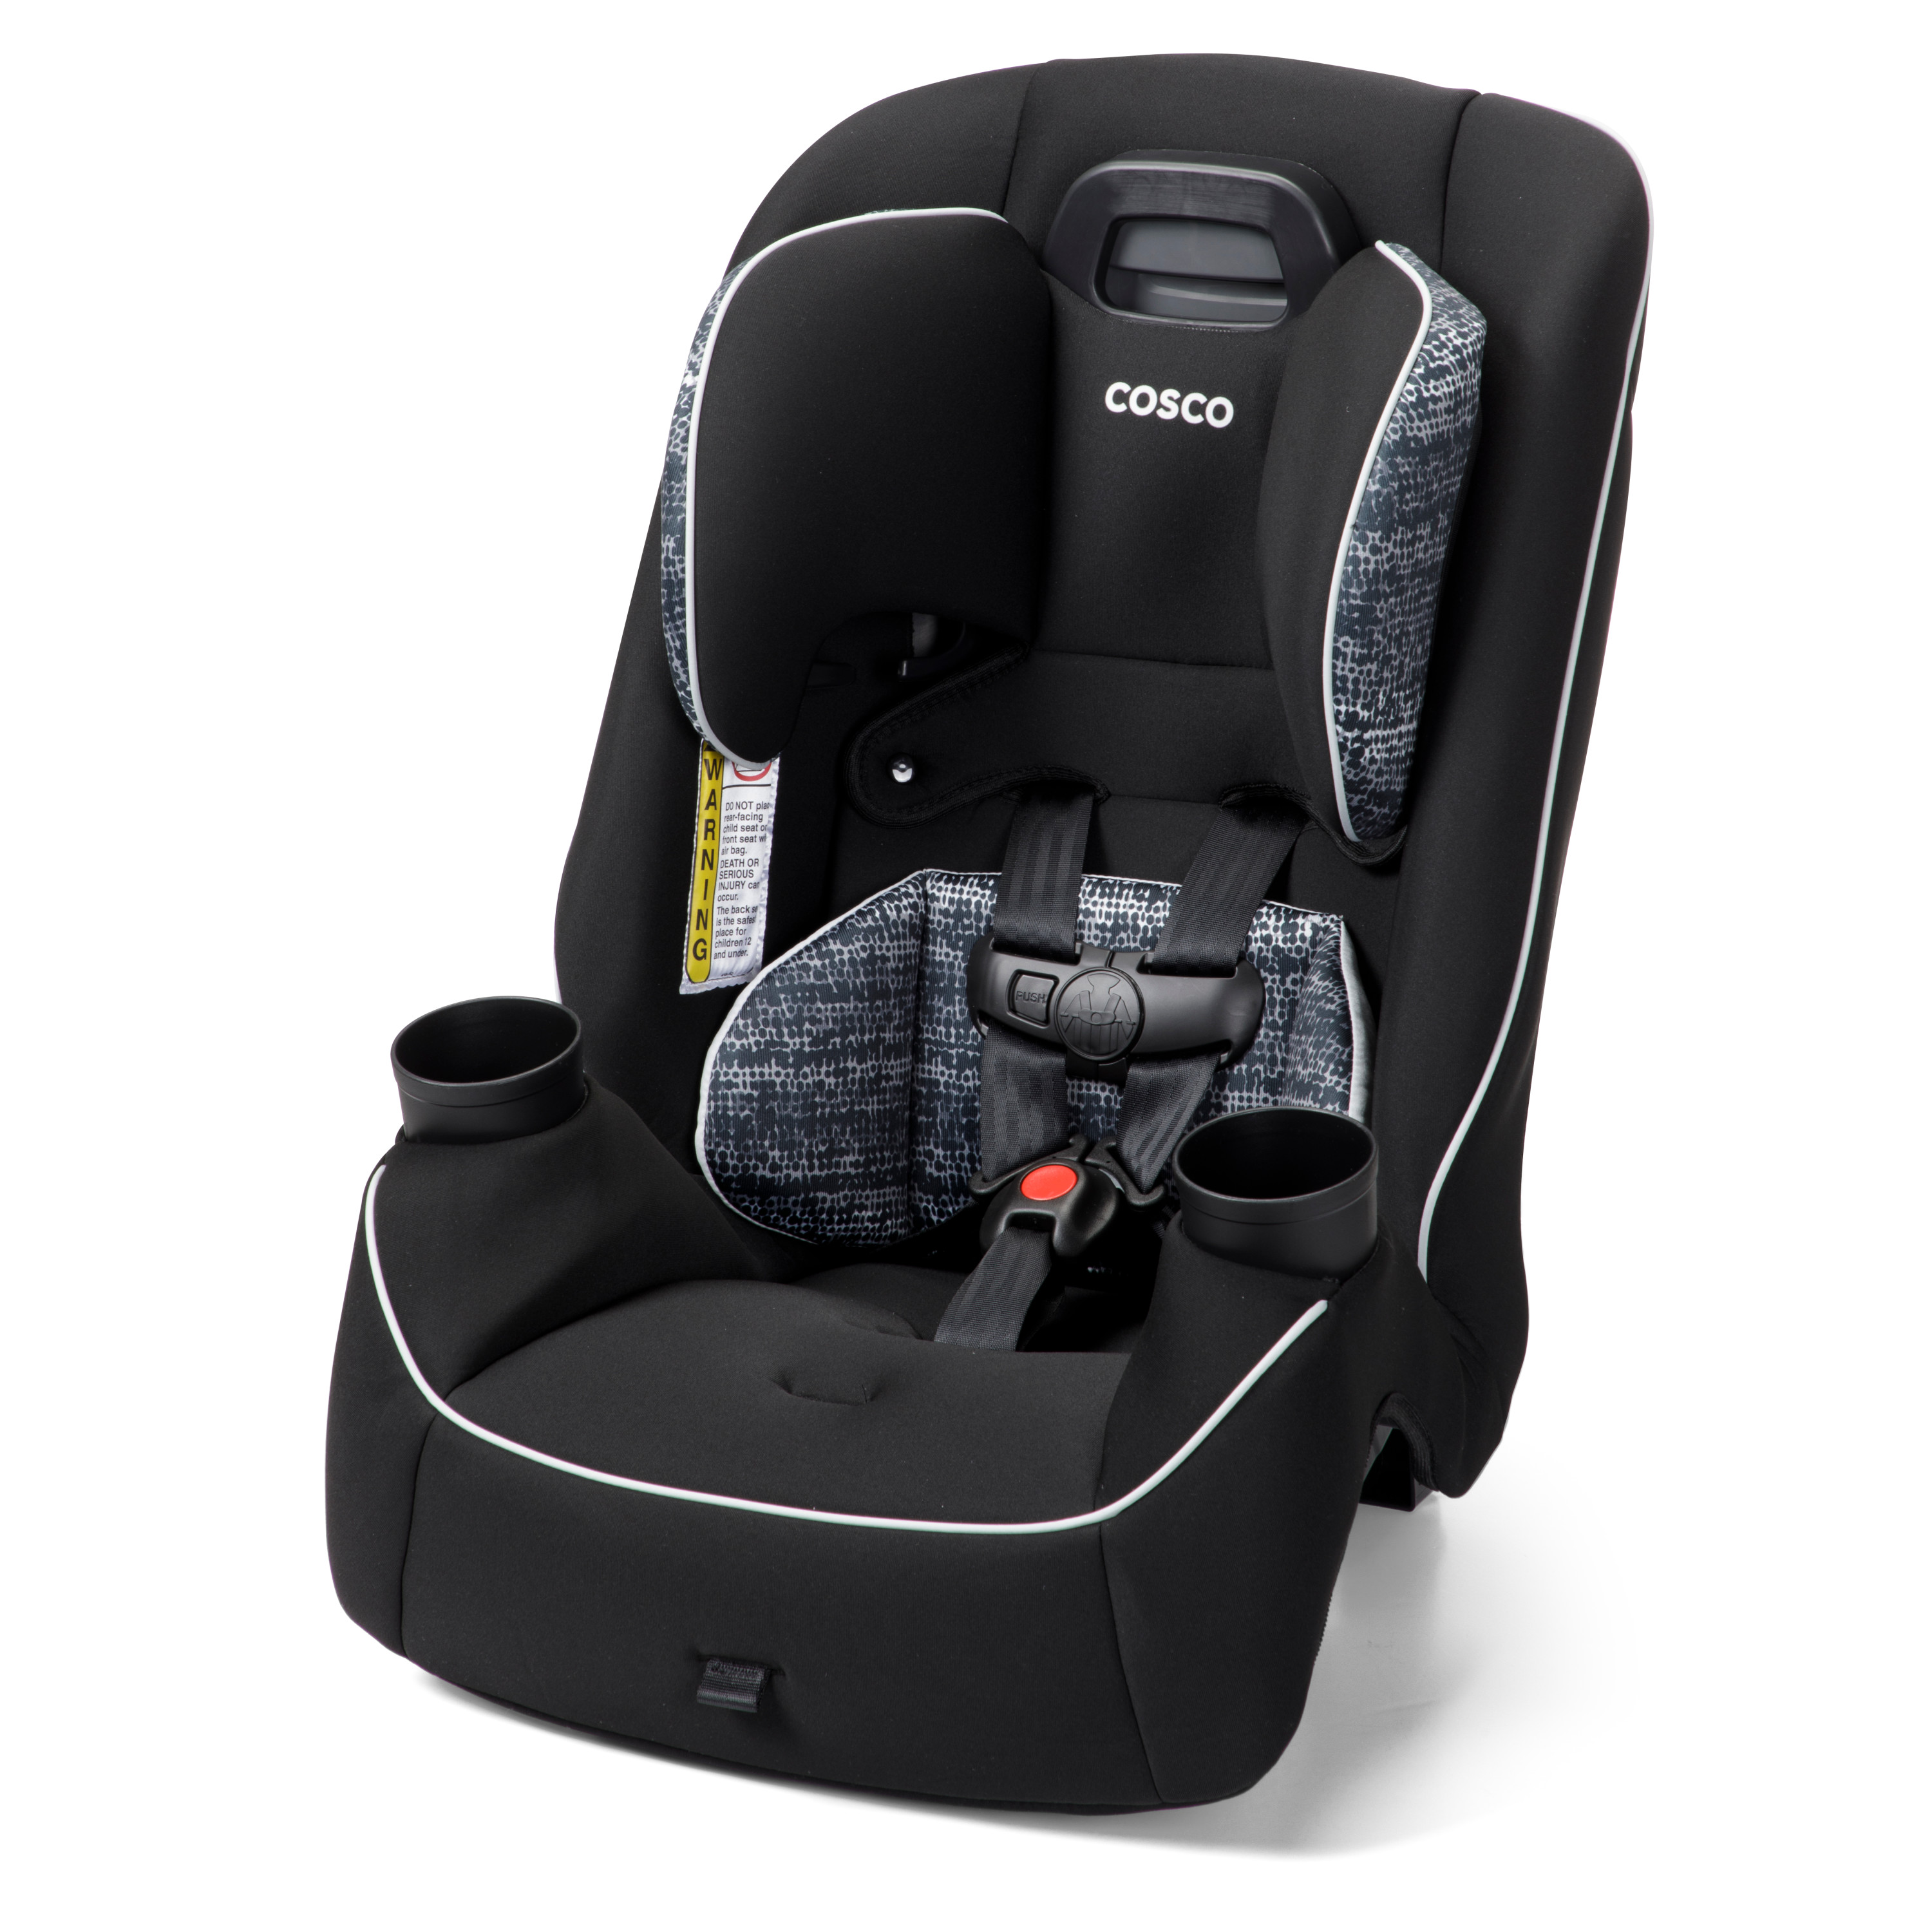 Cosco Kids Easy Elite Slim All-in-One Convertible Car Seat, Black India Ink - image 1 of 27